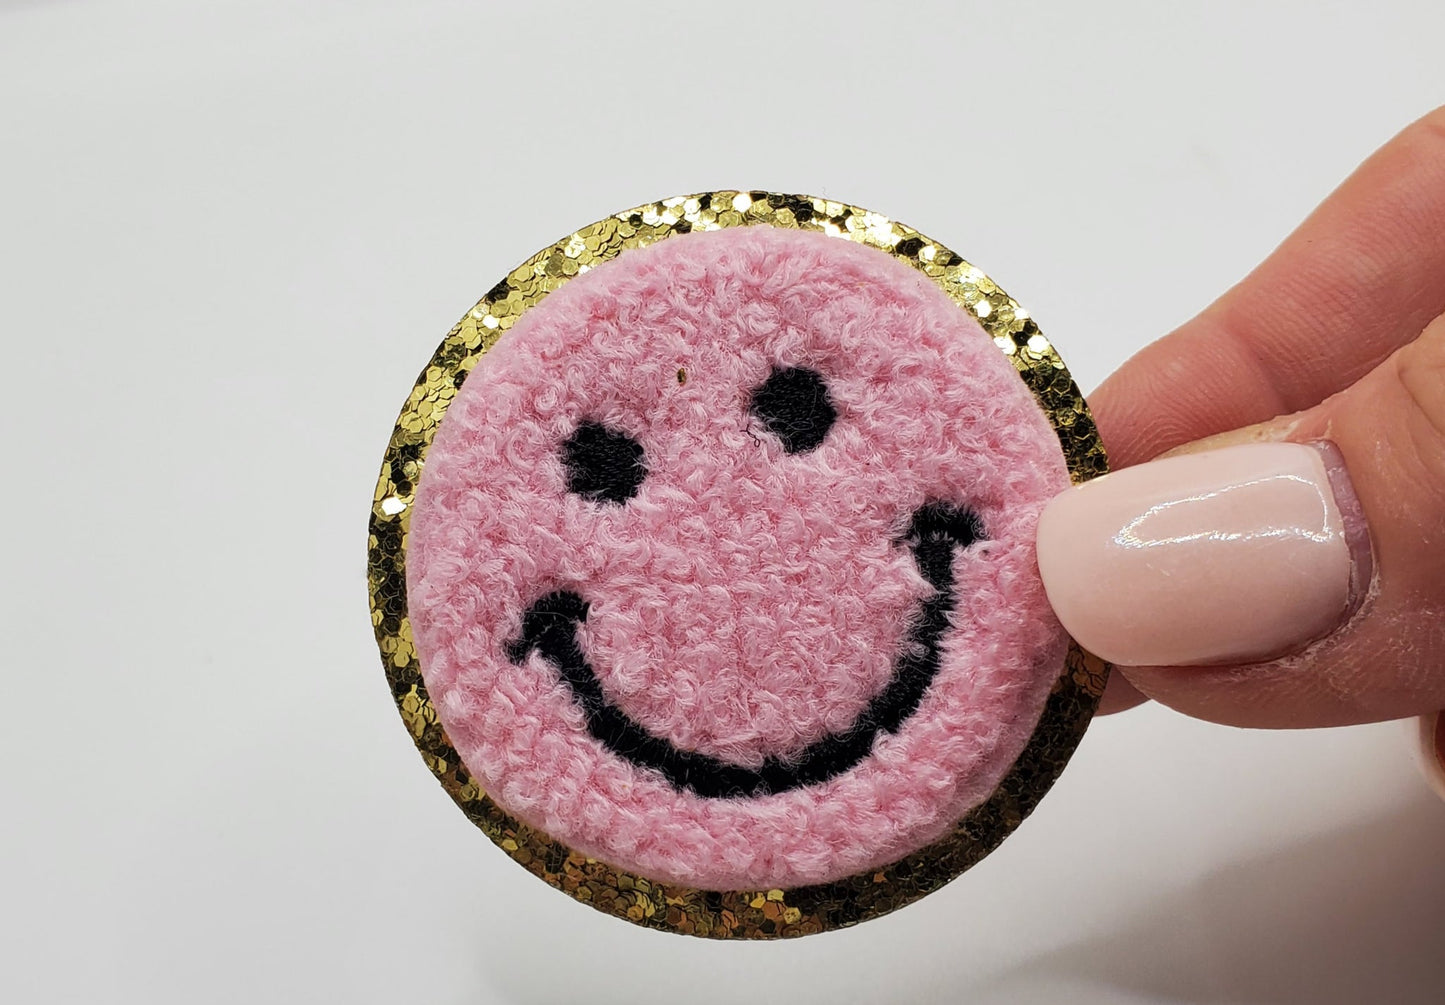 Chenille Smilie Face Patch - Available in 3 Colors